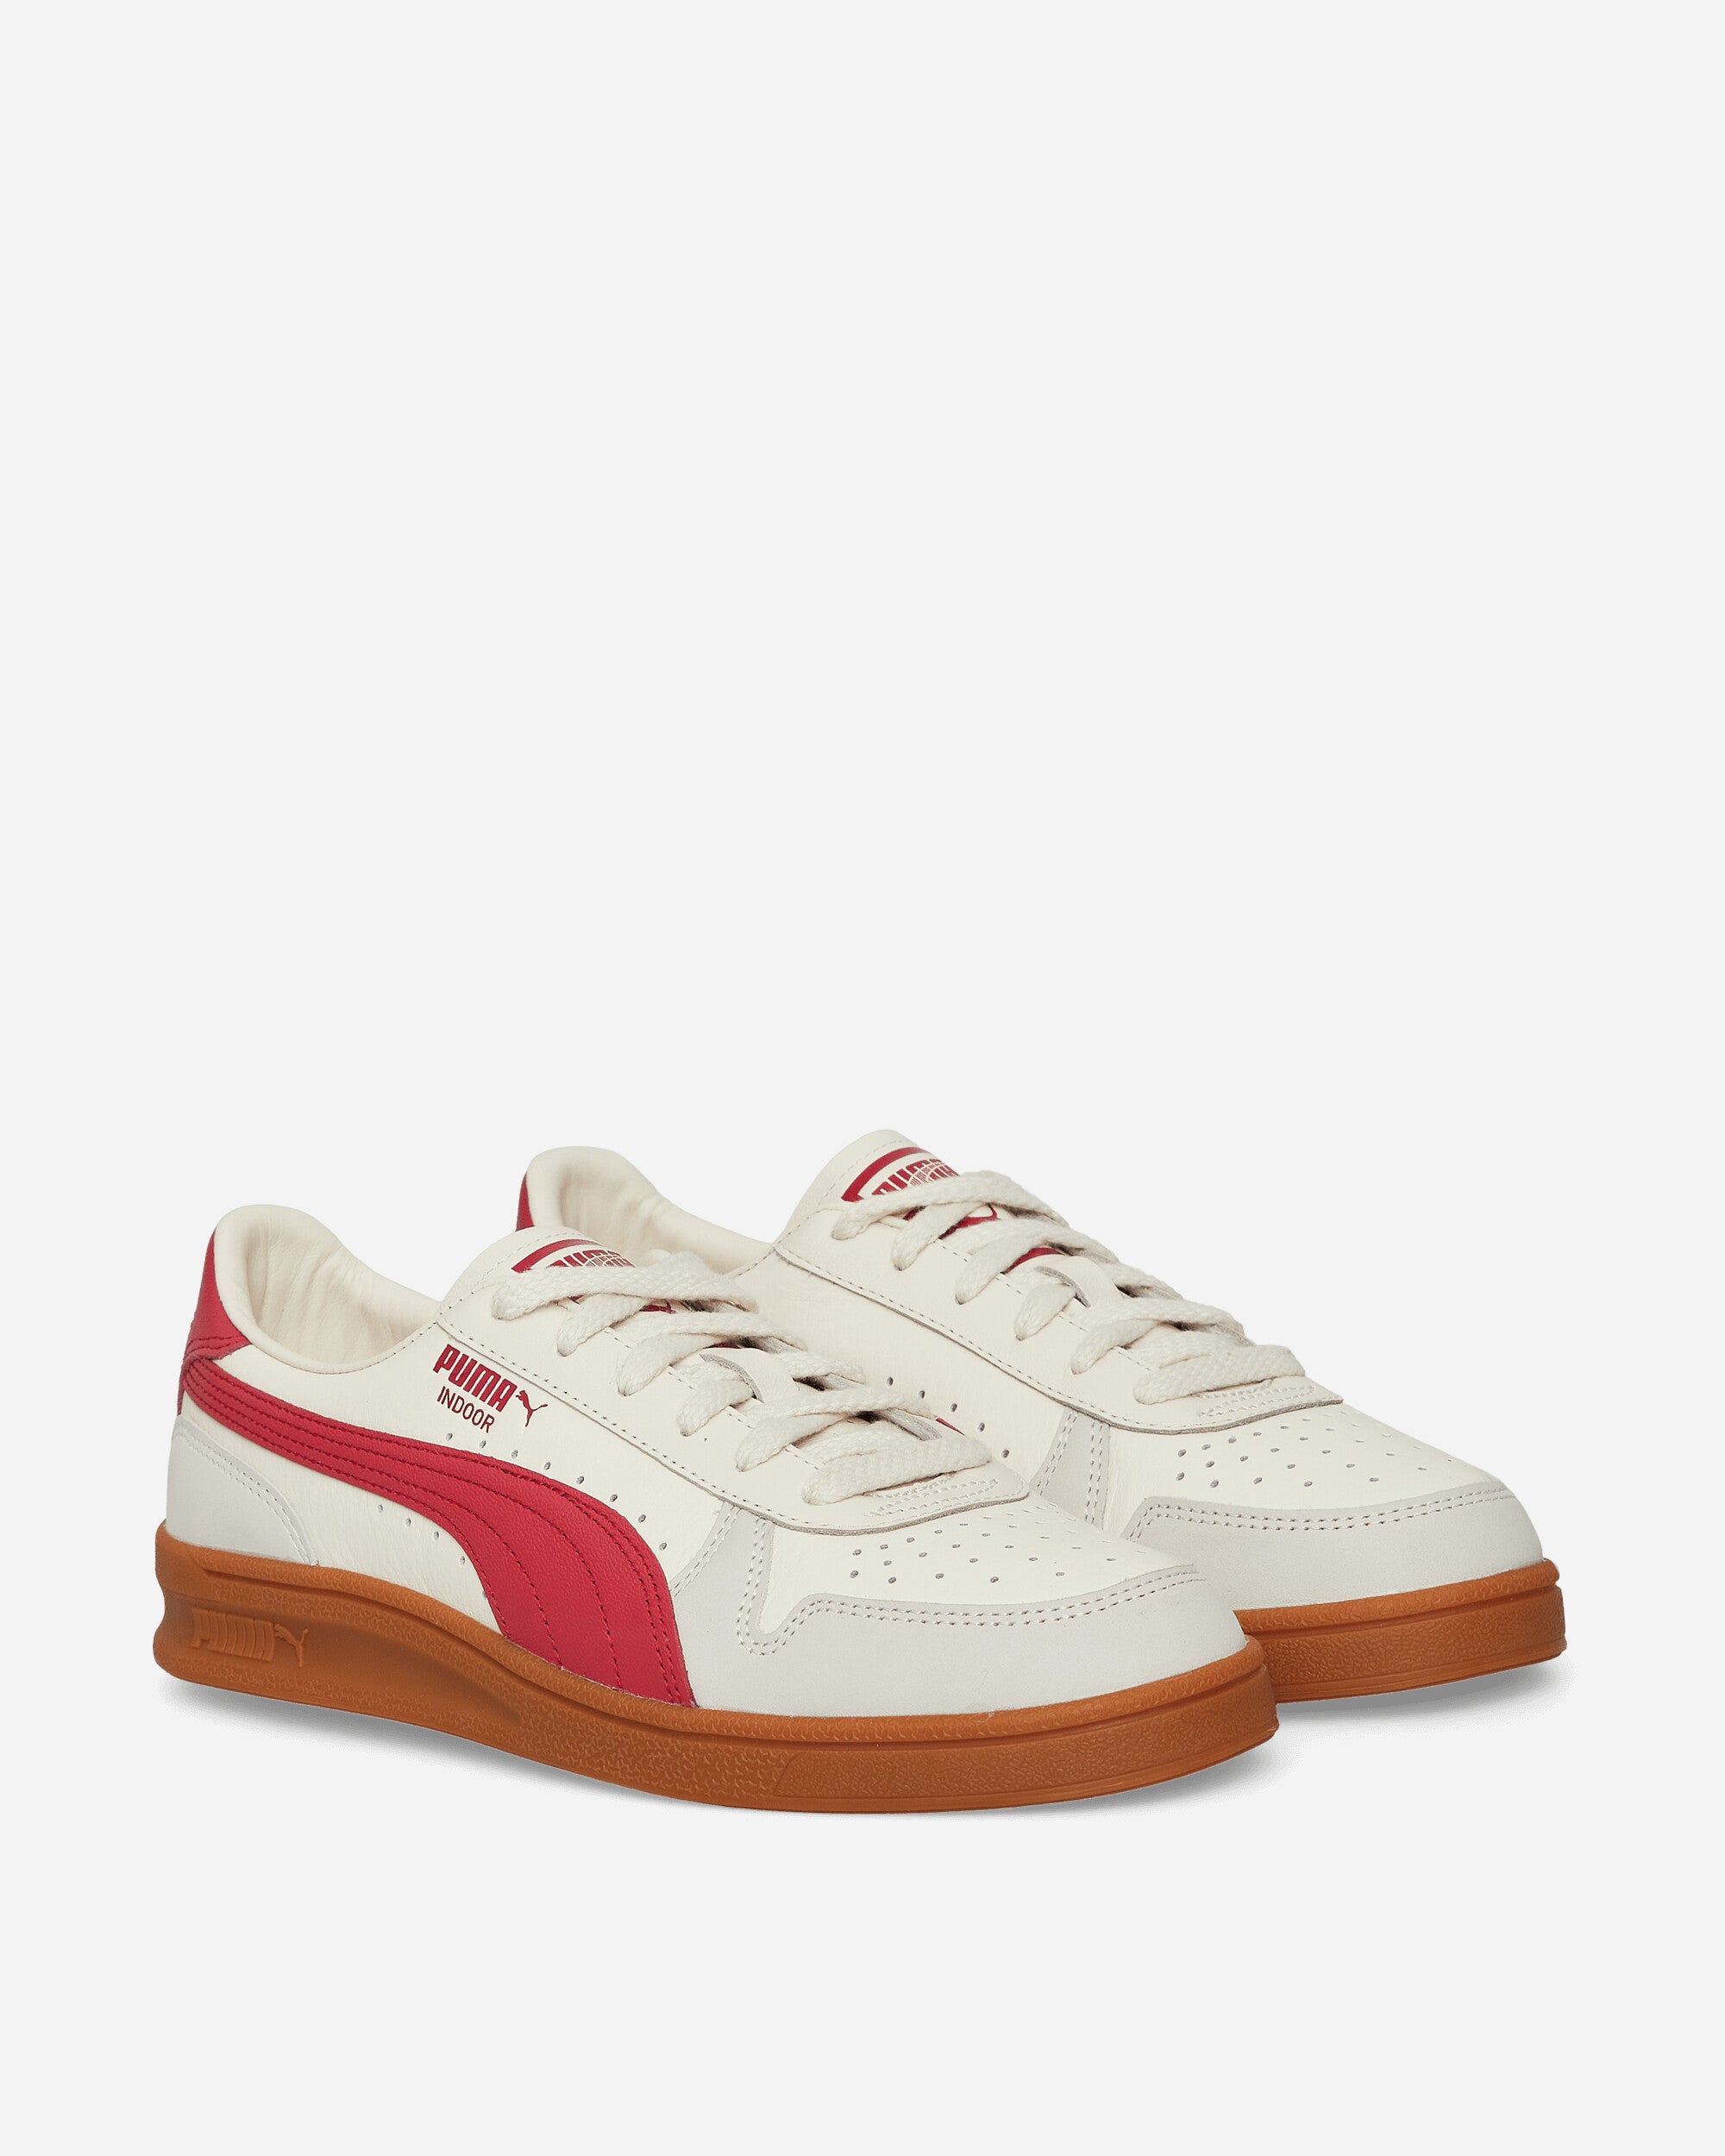 Puma Indoor Og Frosted Ivory/Club Red Sneakers Low 395363-01